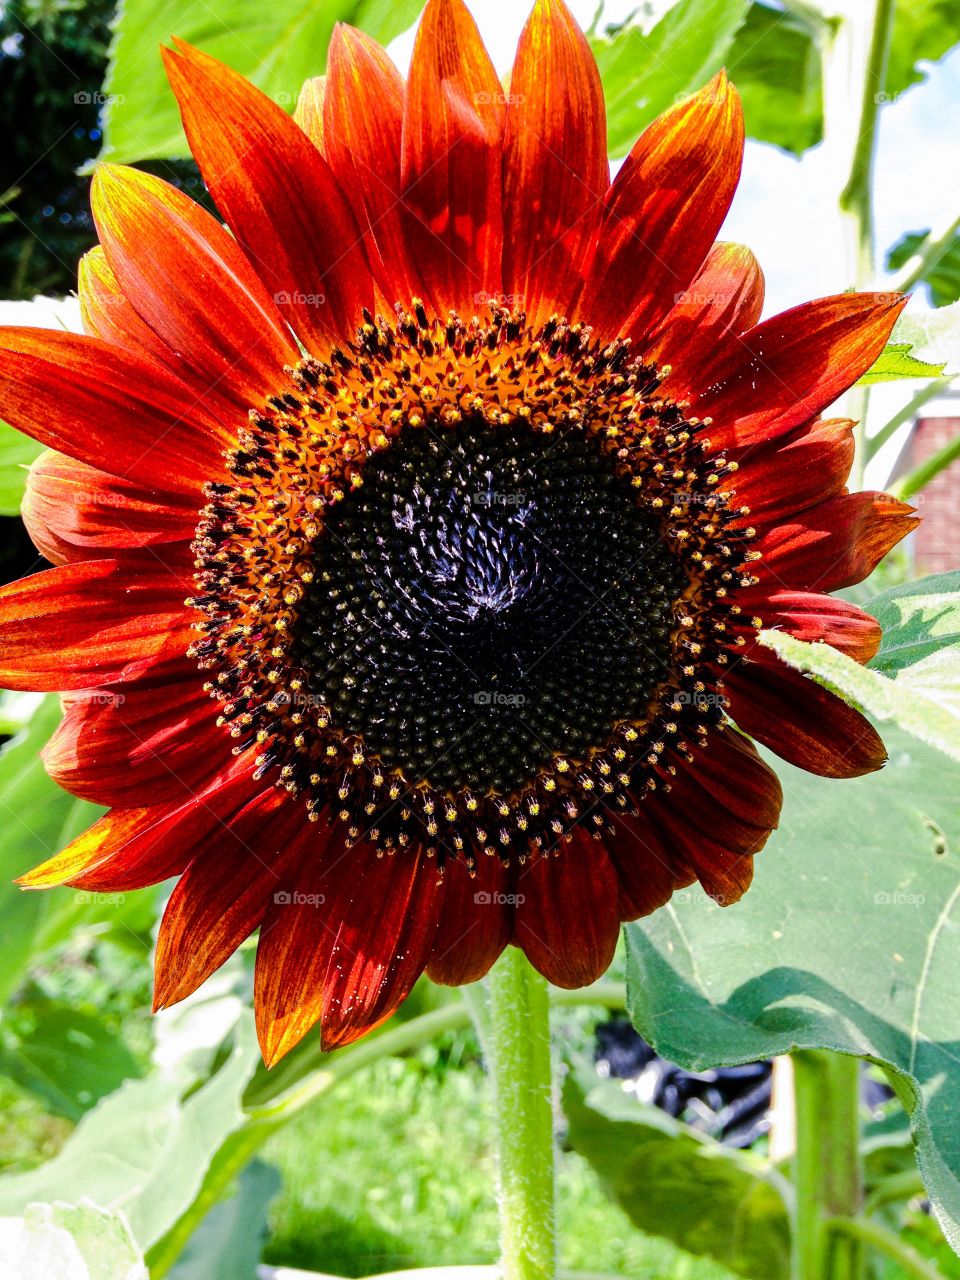 Brilliant and unique sunflower. My urban garden revealed a beautiful sunflower today! Beautiful colors. 